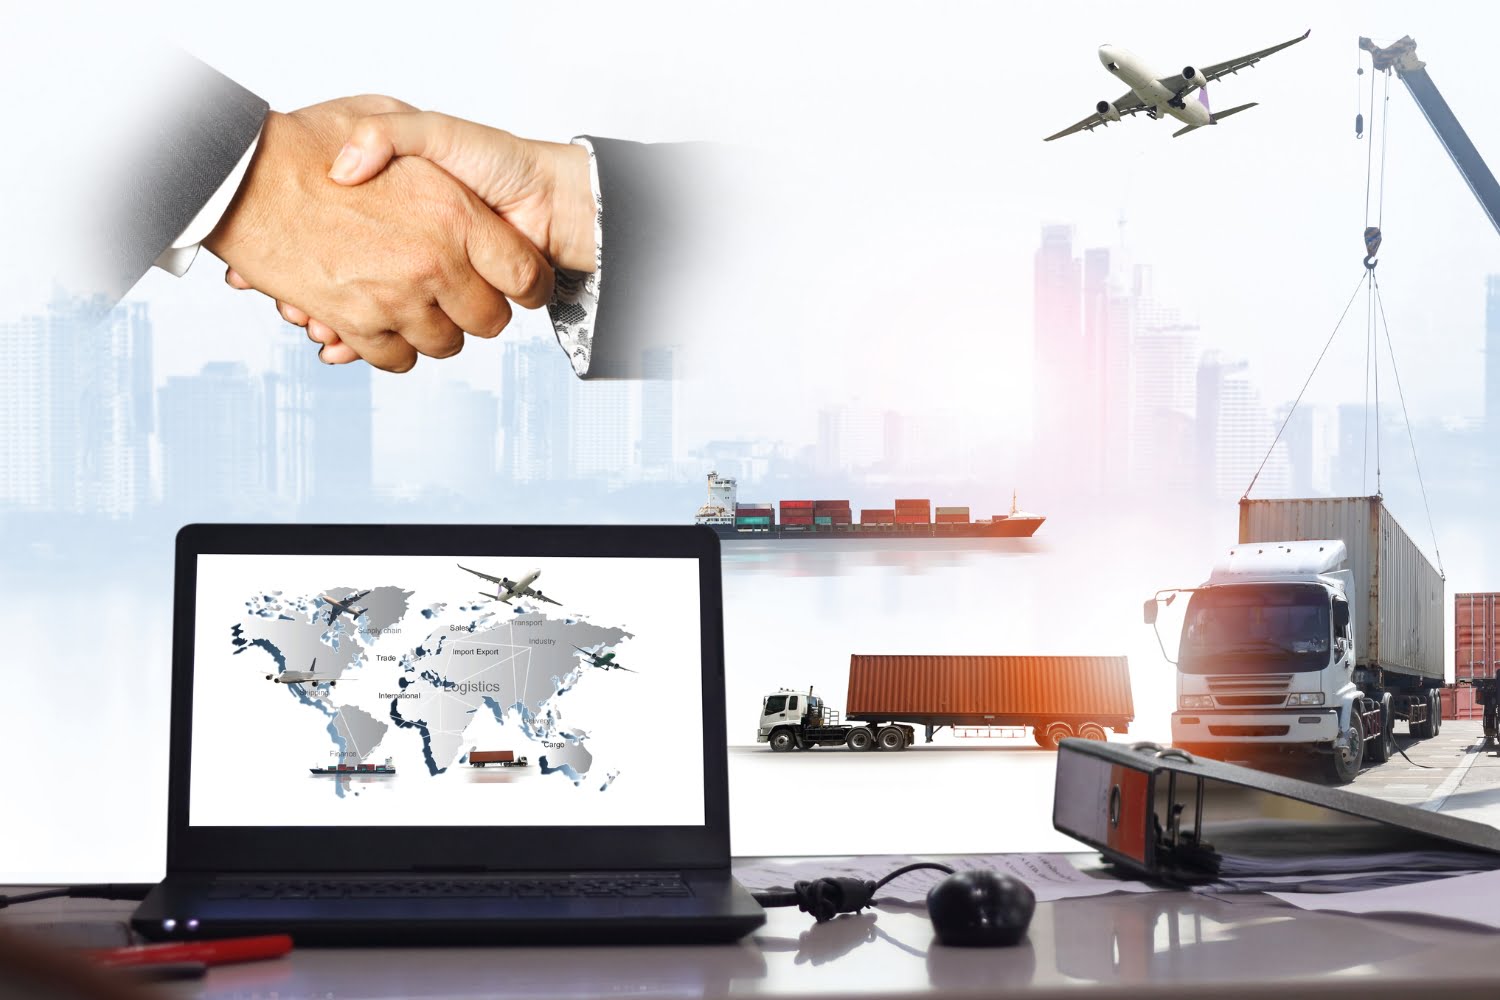 A supply chain network of an airplane, truck, and cargo ship with a city background next to a laptop and desk